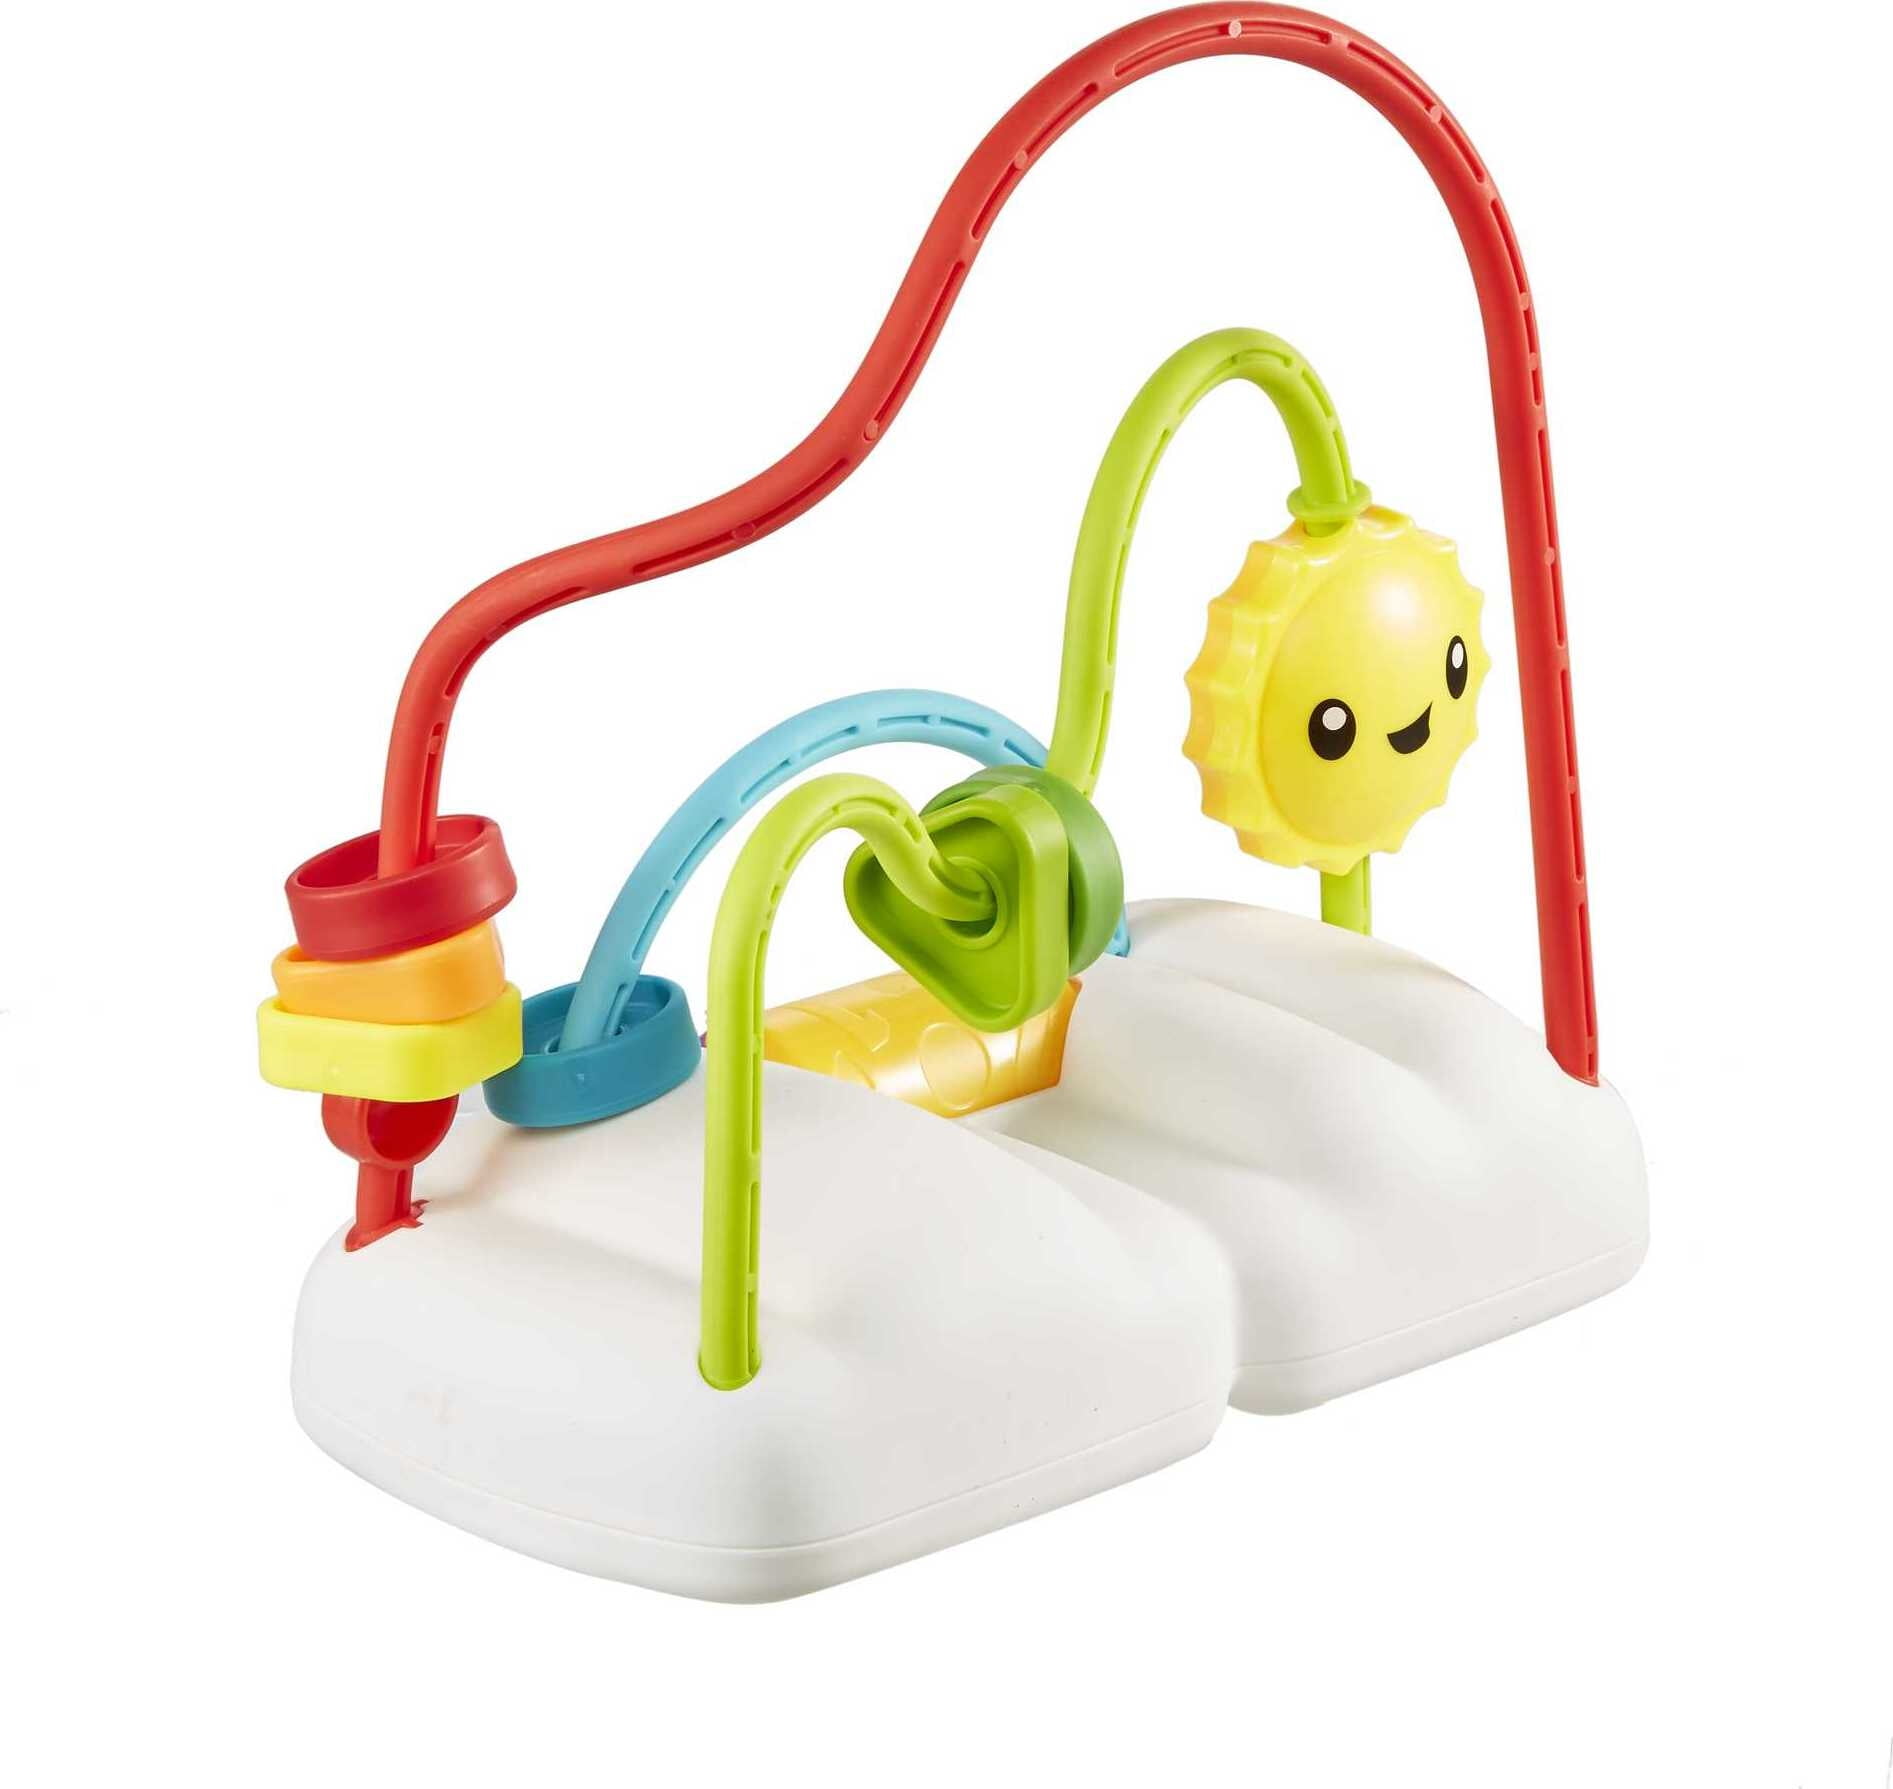 Fisher-Price Chasing Rainbows Bead Maze Colorful Playset